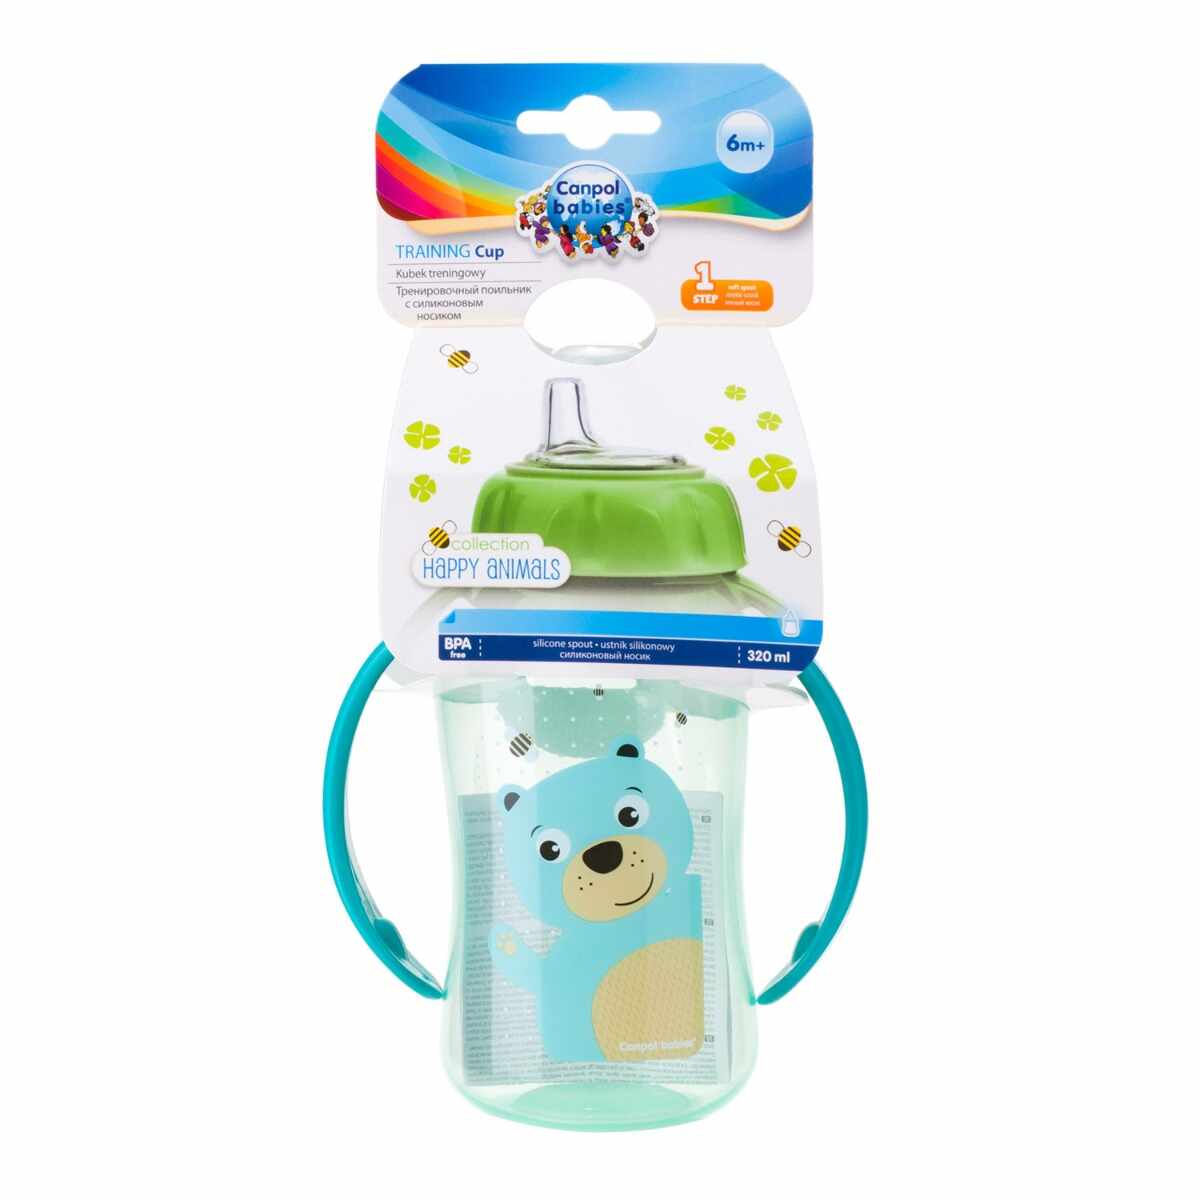 Cana antrenament din silicon Cute Animals Urs, 320ml, Canpol babies